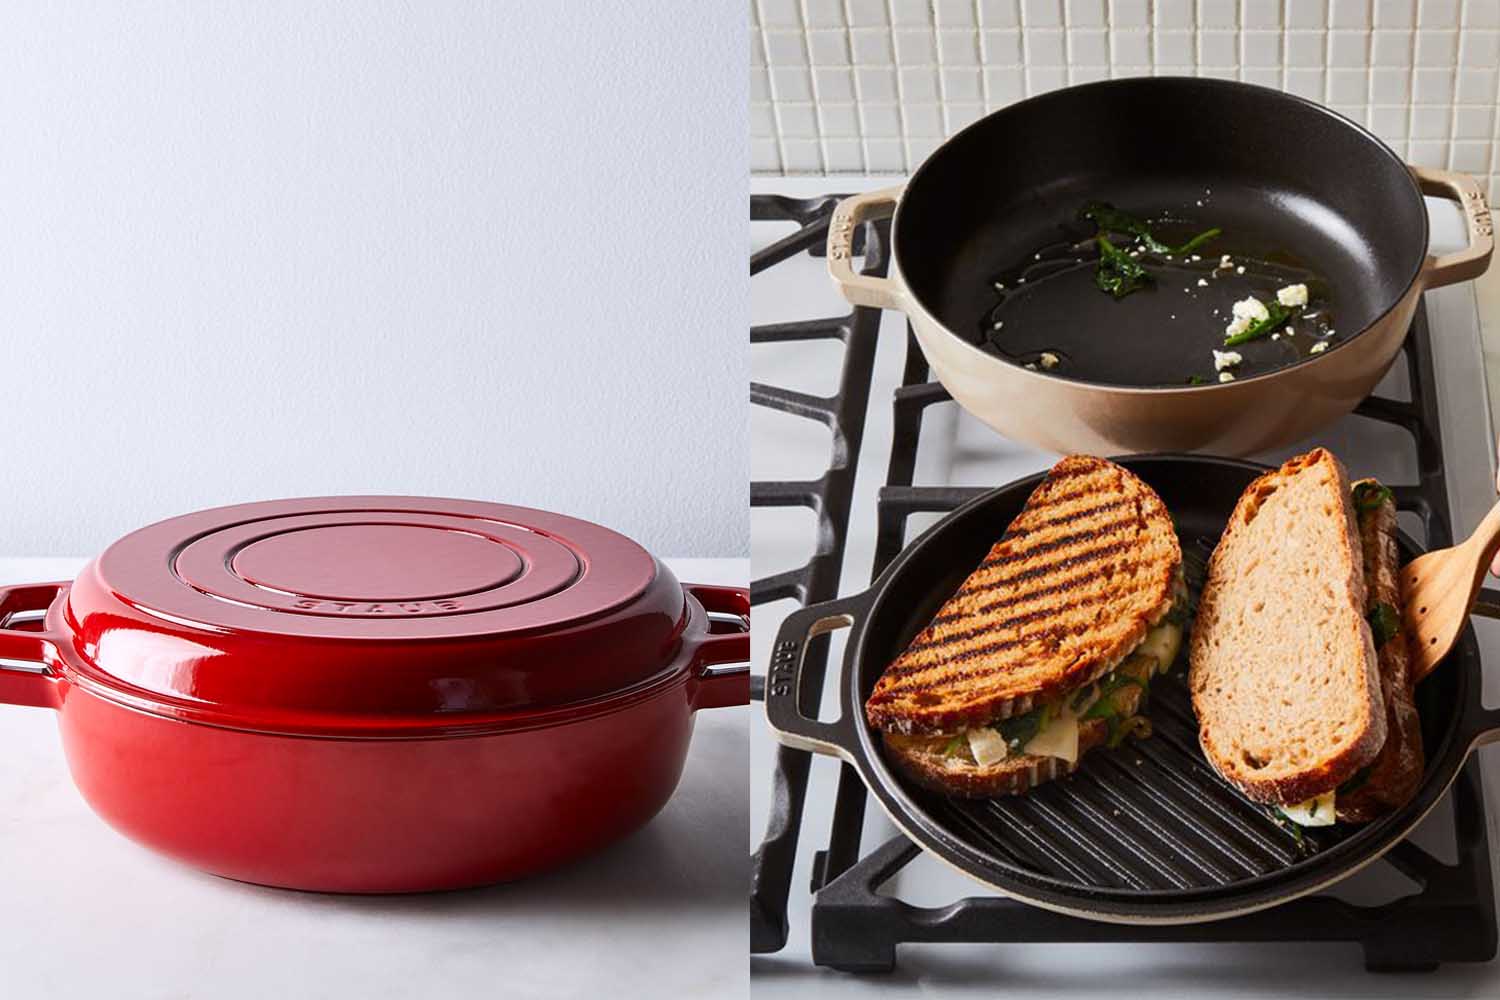 Deal: This Staub 2-in-1 Grill Pan & Cocotte Is $230 Off